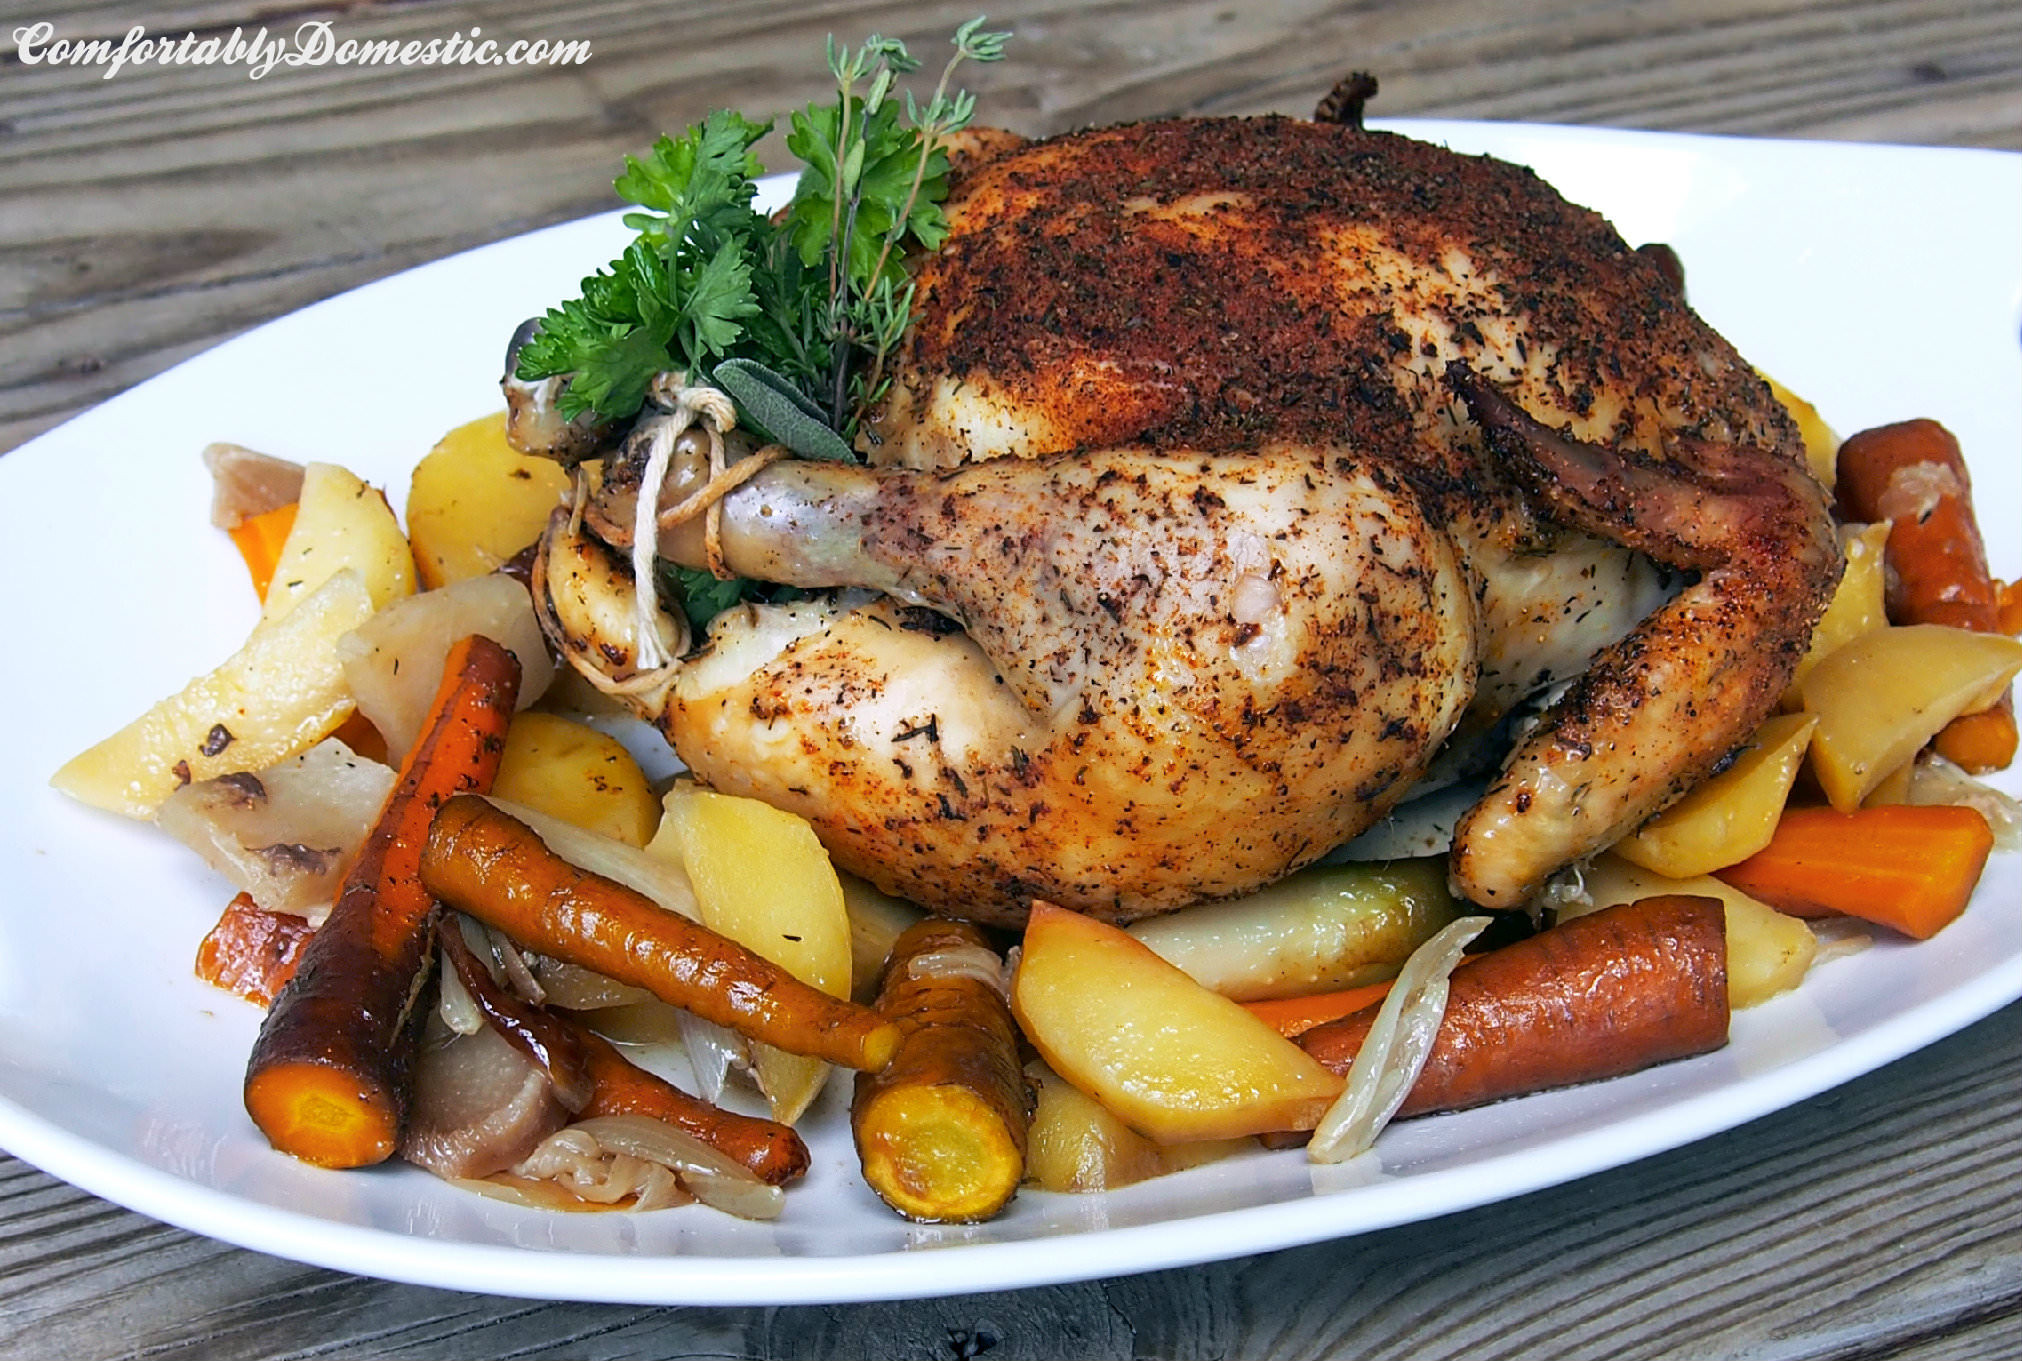 Slow Cooker Roasted Chicken
 Slow Cooker Whole Roasted Chicken fortably Domestic